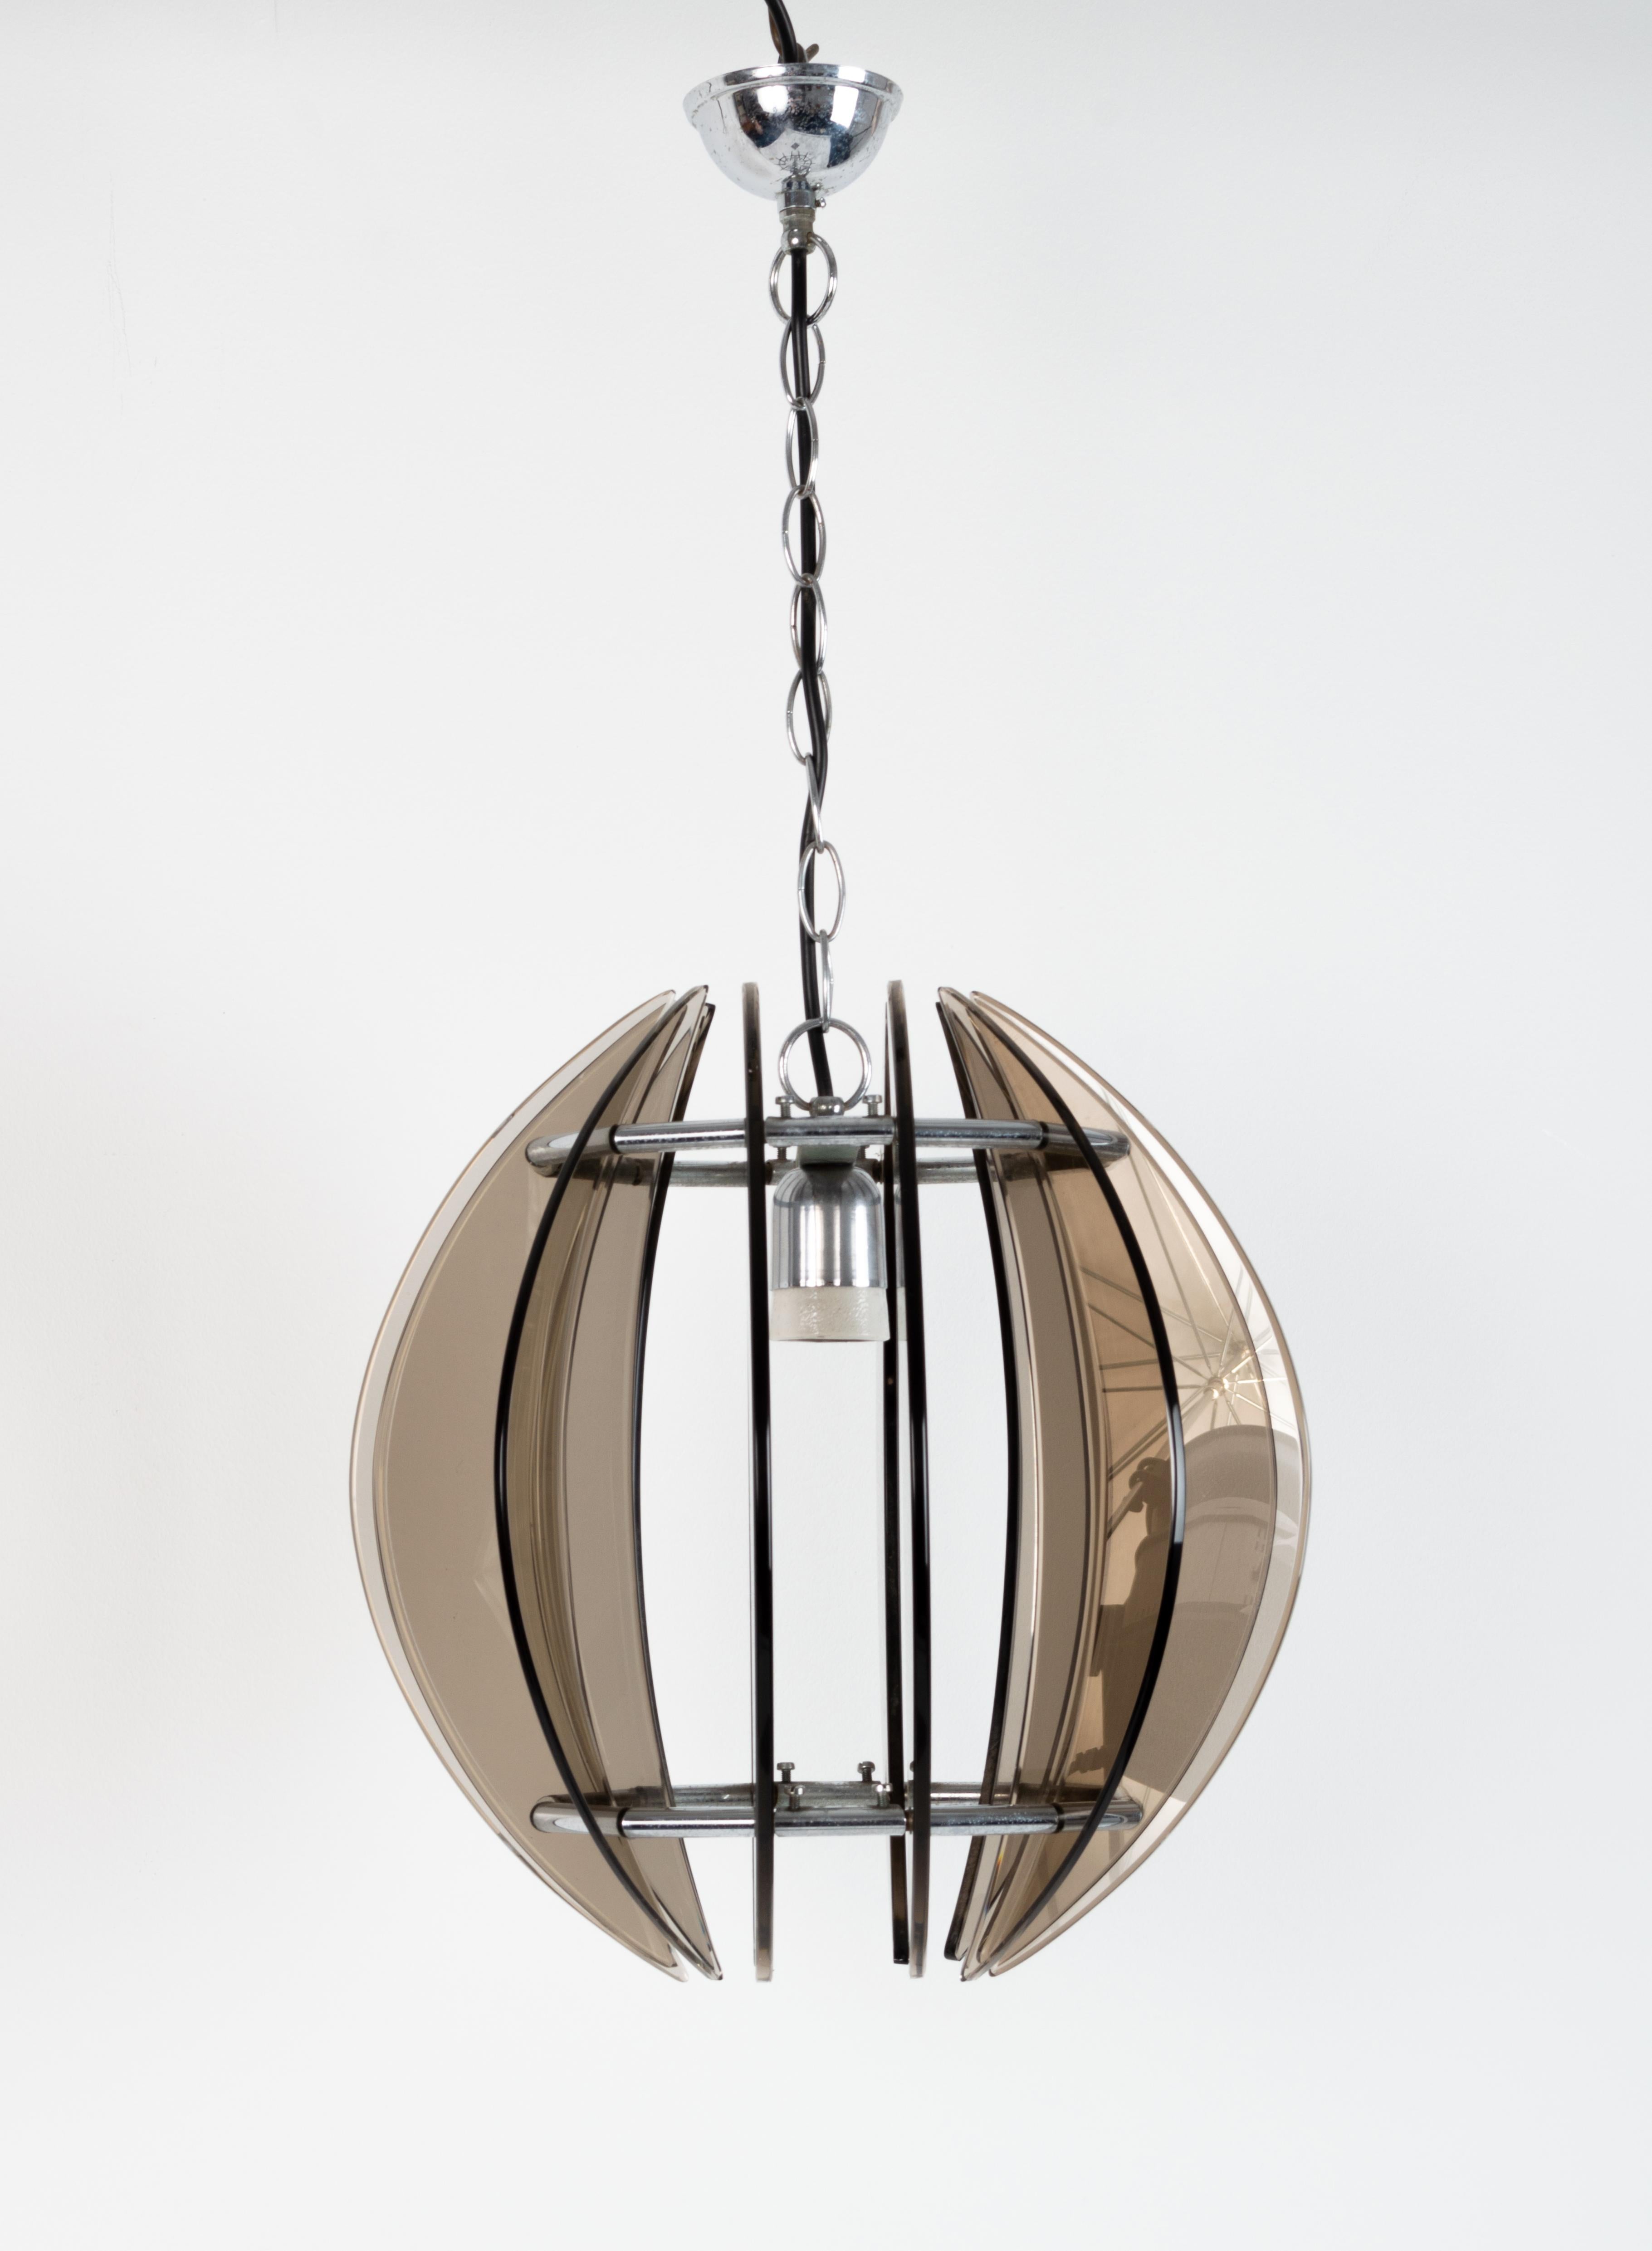 Mid-Century Modern Italian Fontana Arte Style Smoked Glass Pendant Light In Good Condition For Sale In London, GB